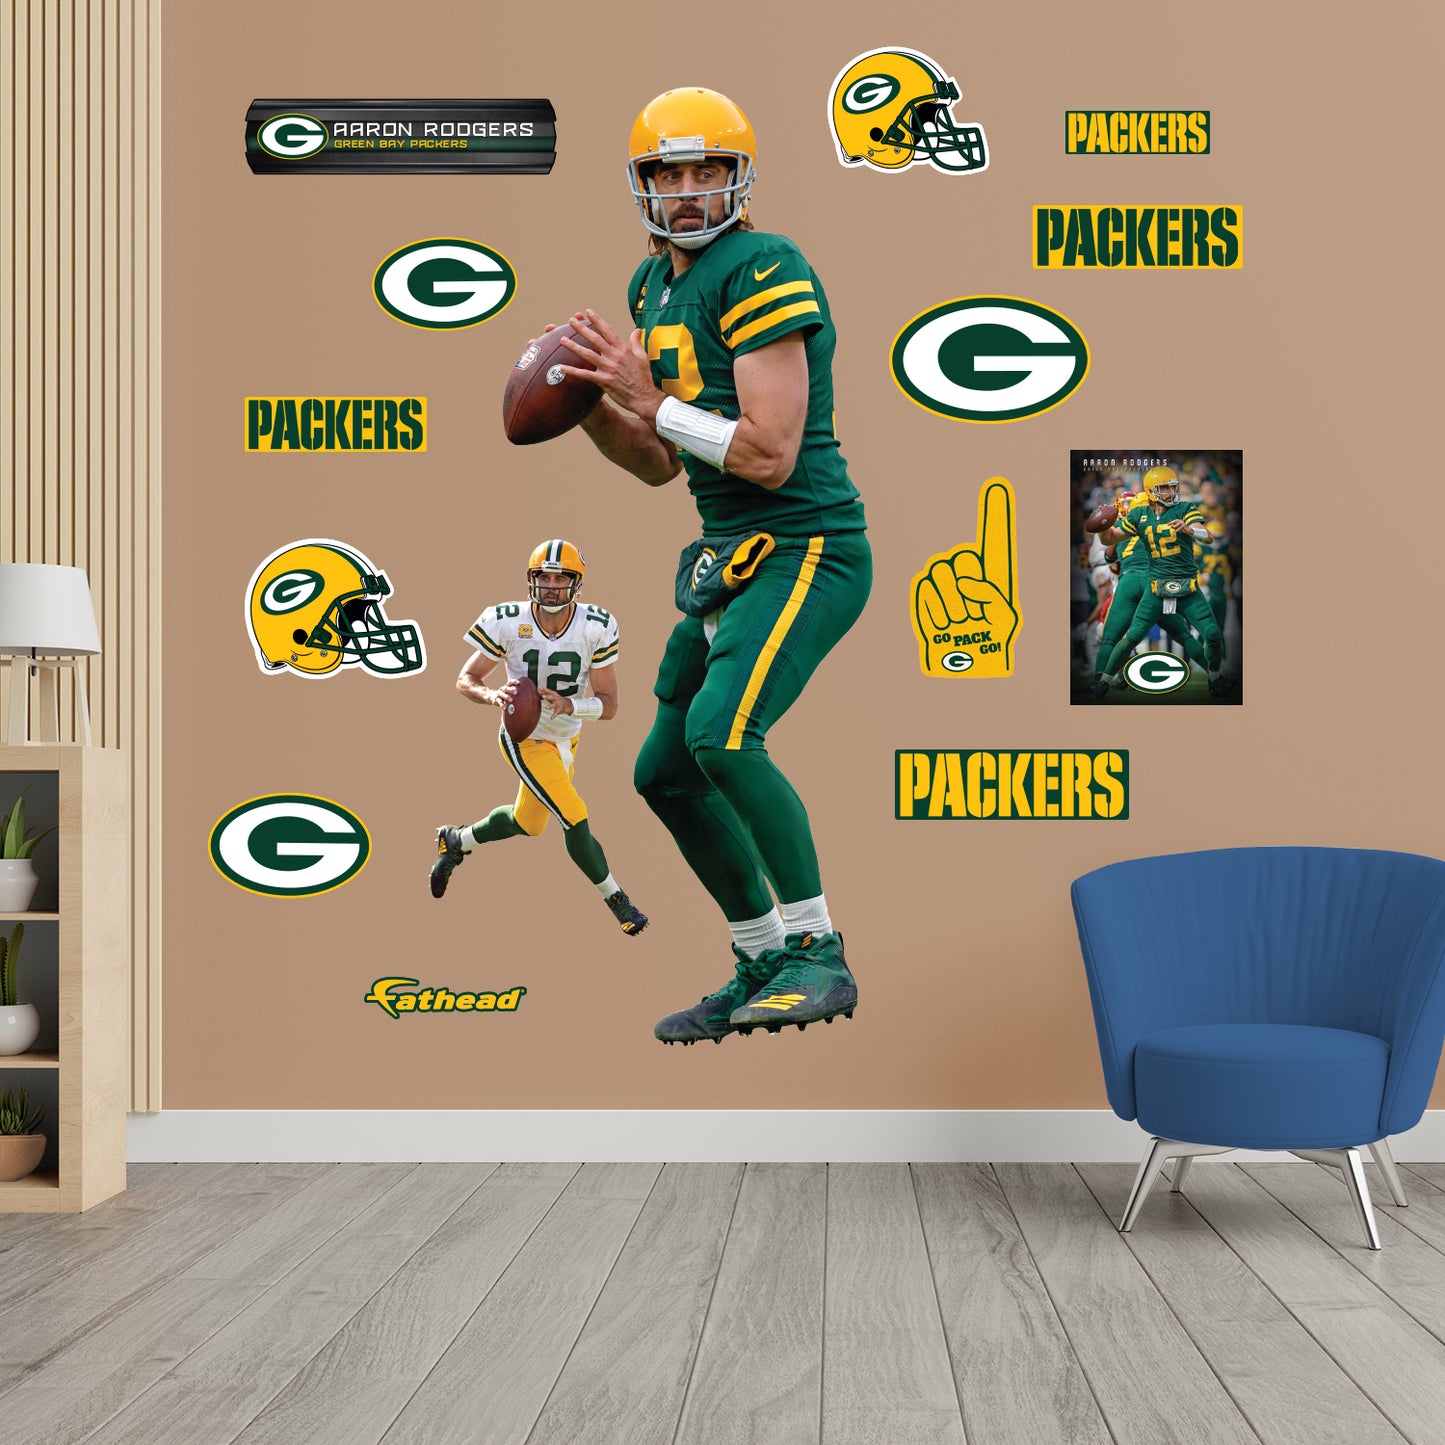 Green Bay Packers: Aaron Rodgers 2021 Throwback        - Officially Licensed NFL Removable     Adhesive Decal